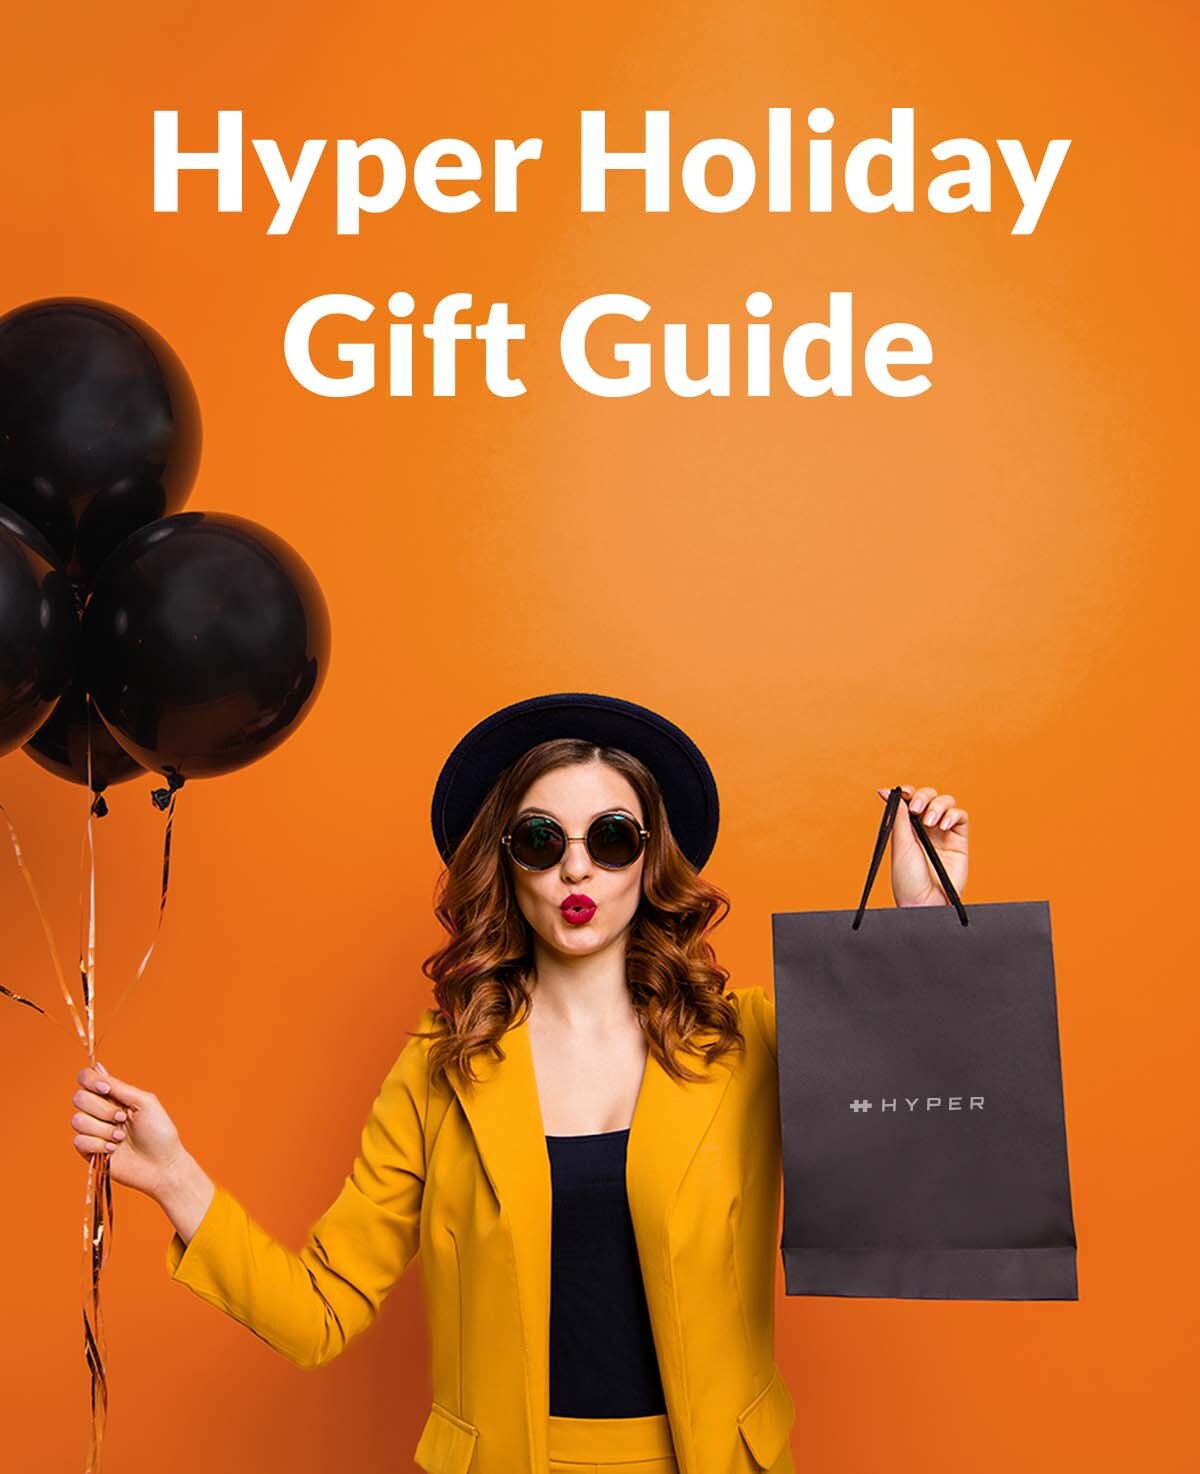 Hyper Holiday Gift Guide